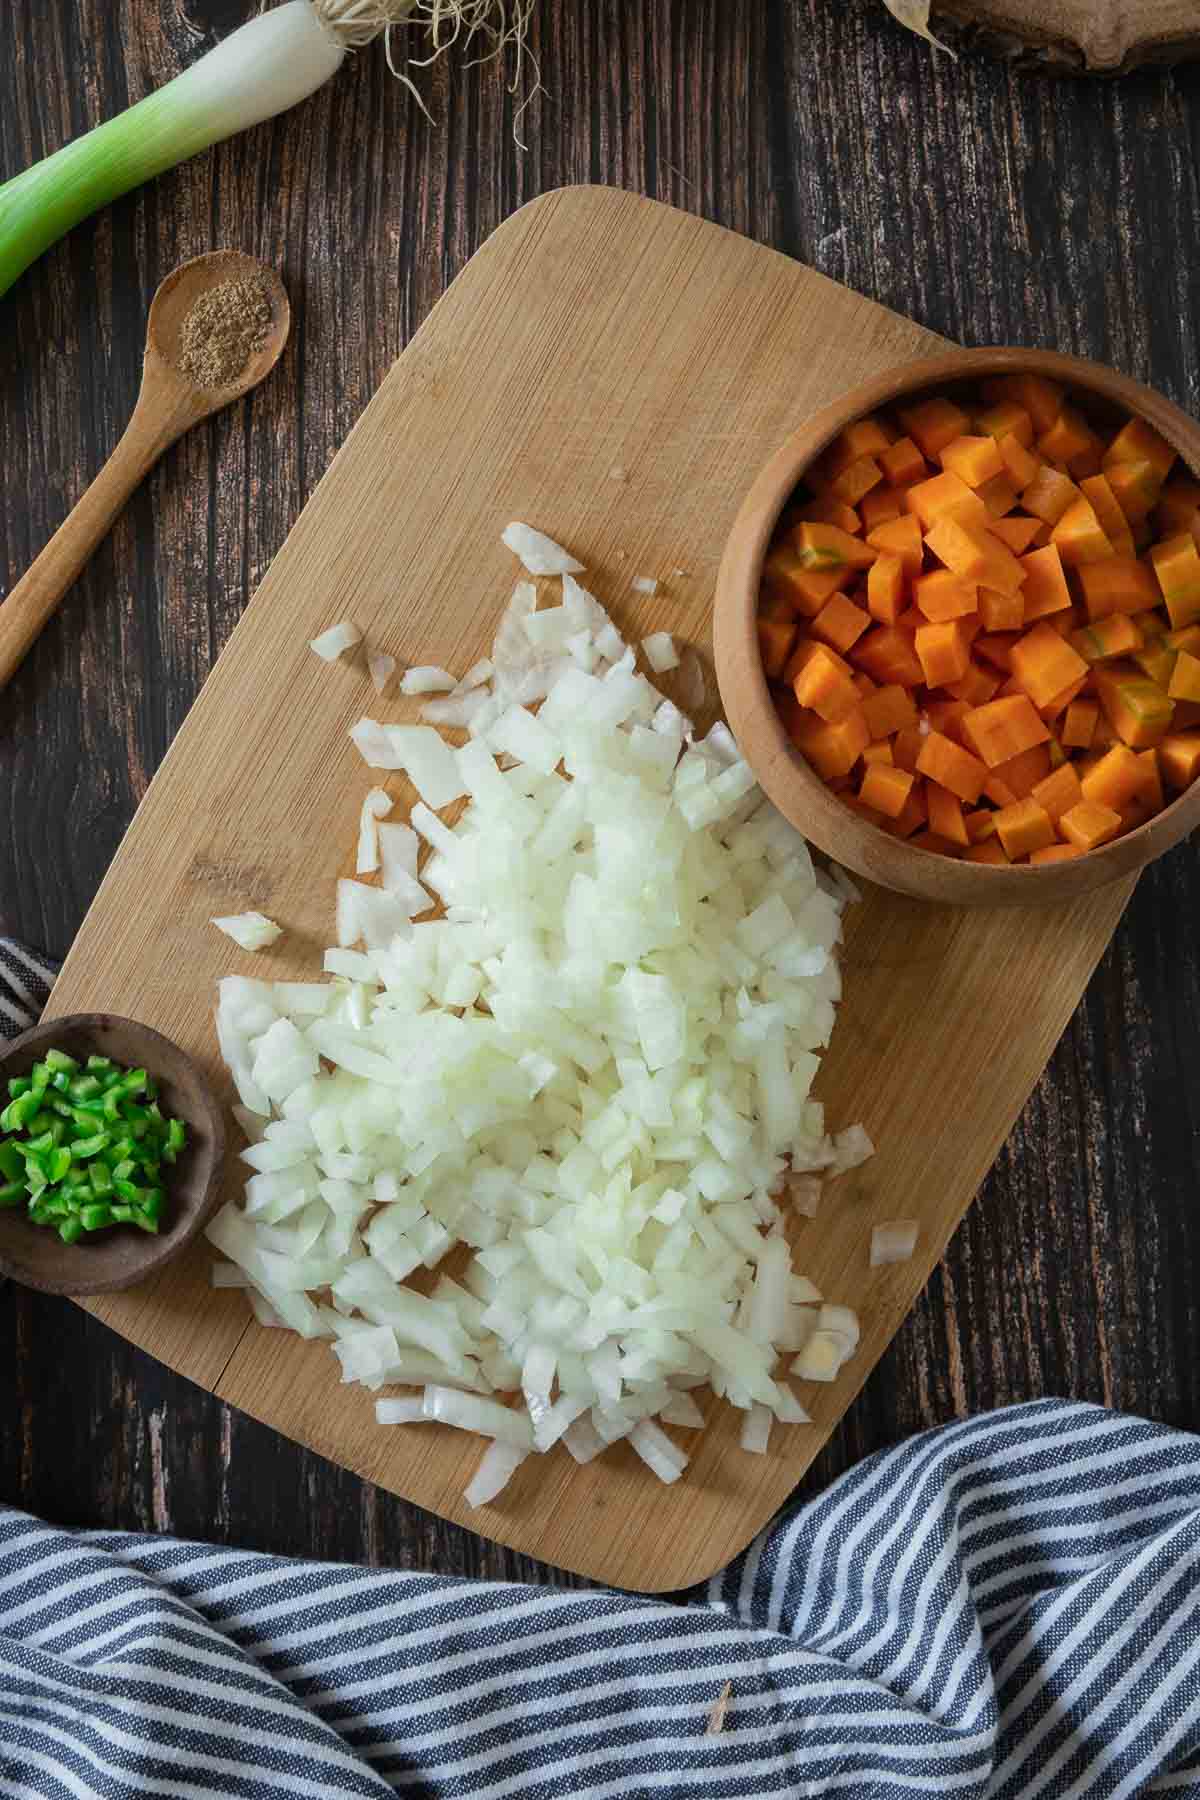 Diced and minced vegetables and aromatics on a wooden board.